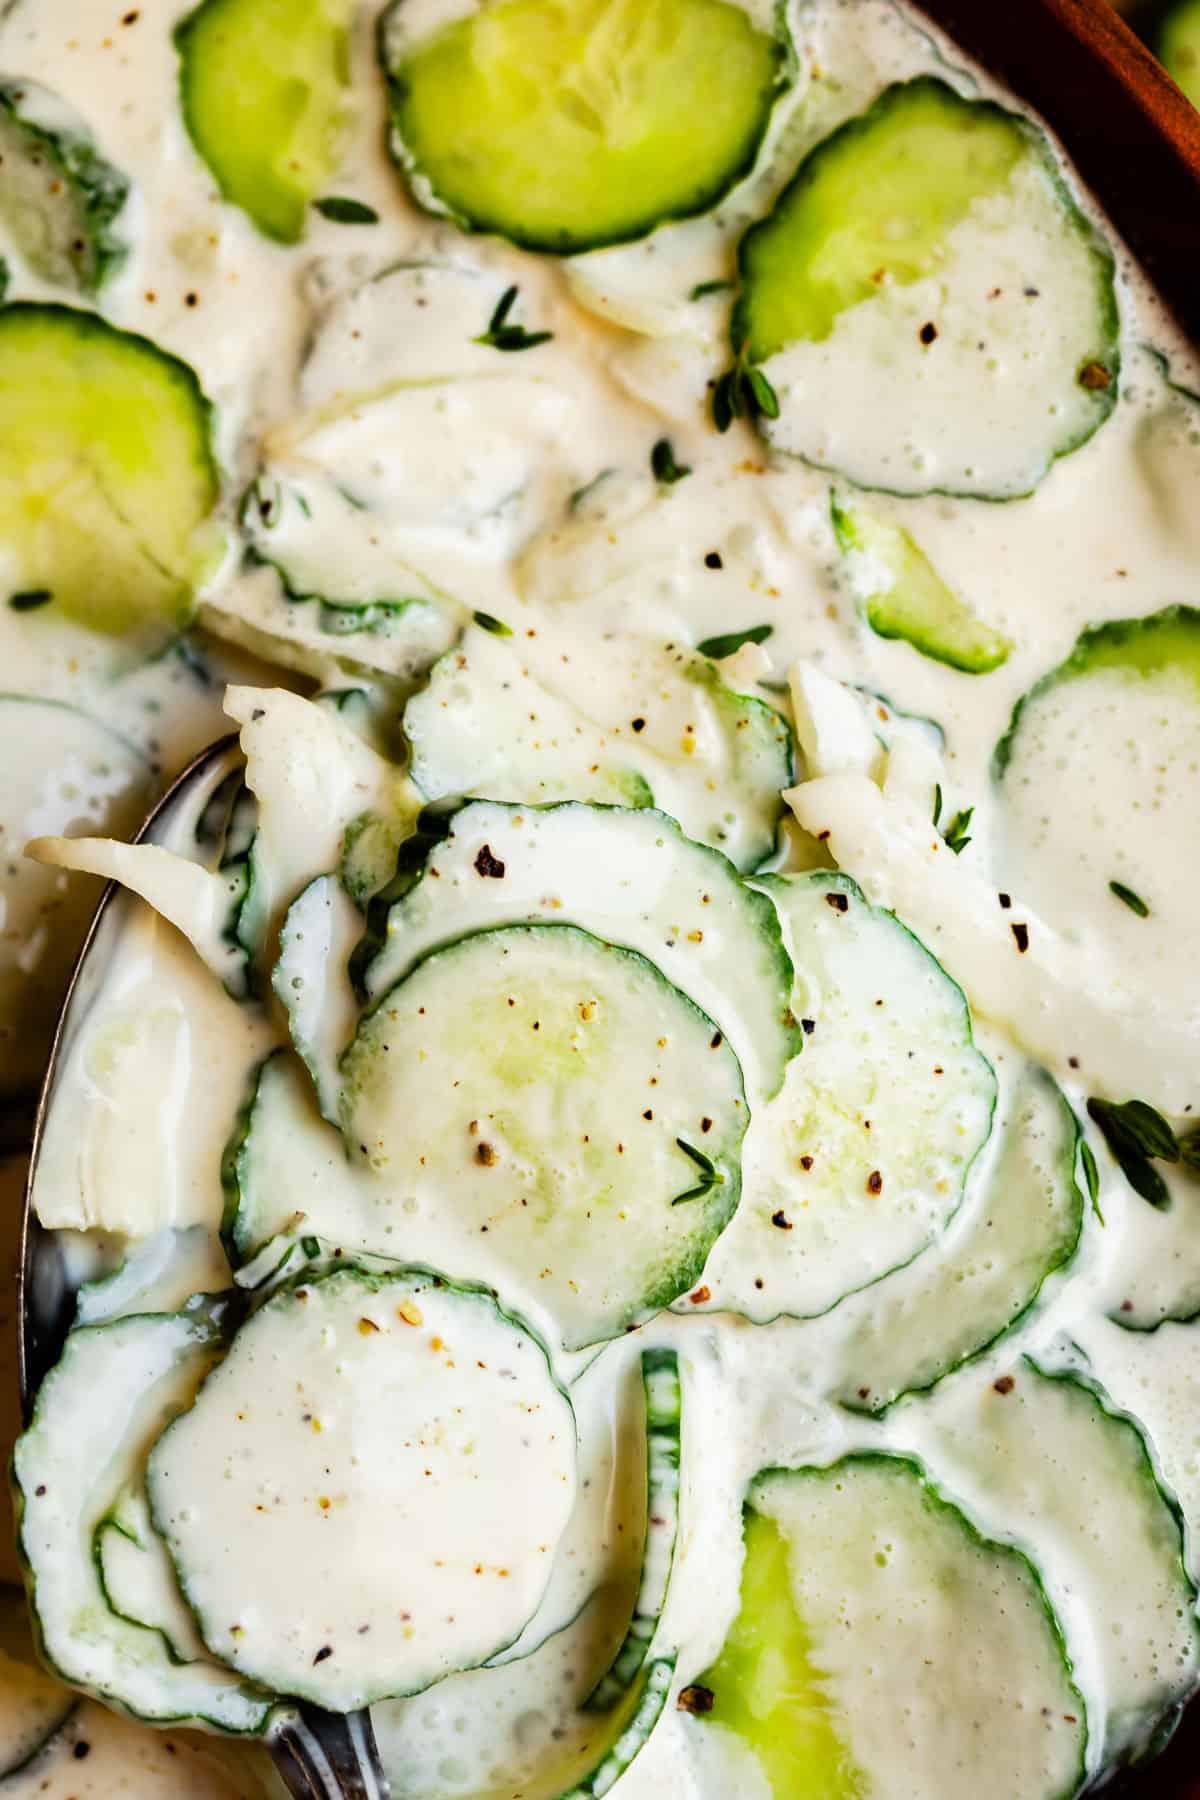 cucumber salad recipe shot from overhead with a creamy sauce and spoon in the corner.